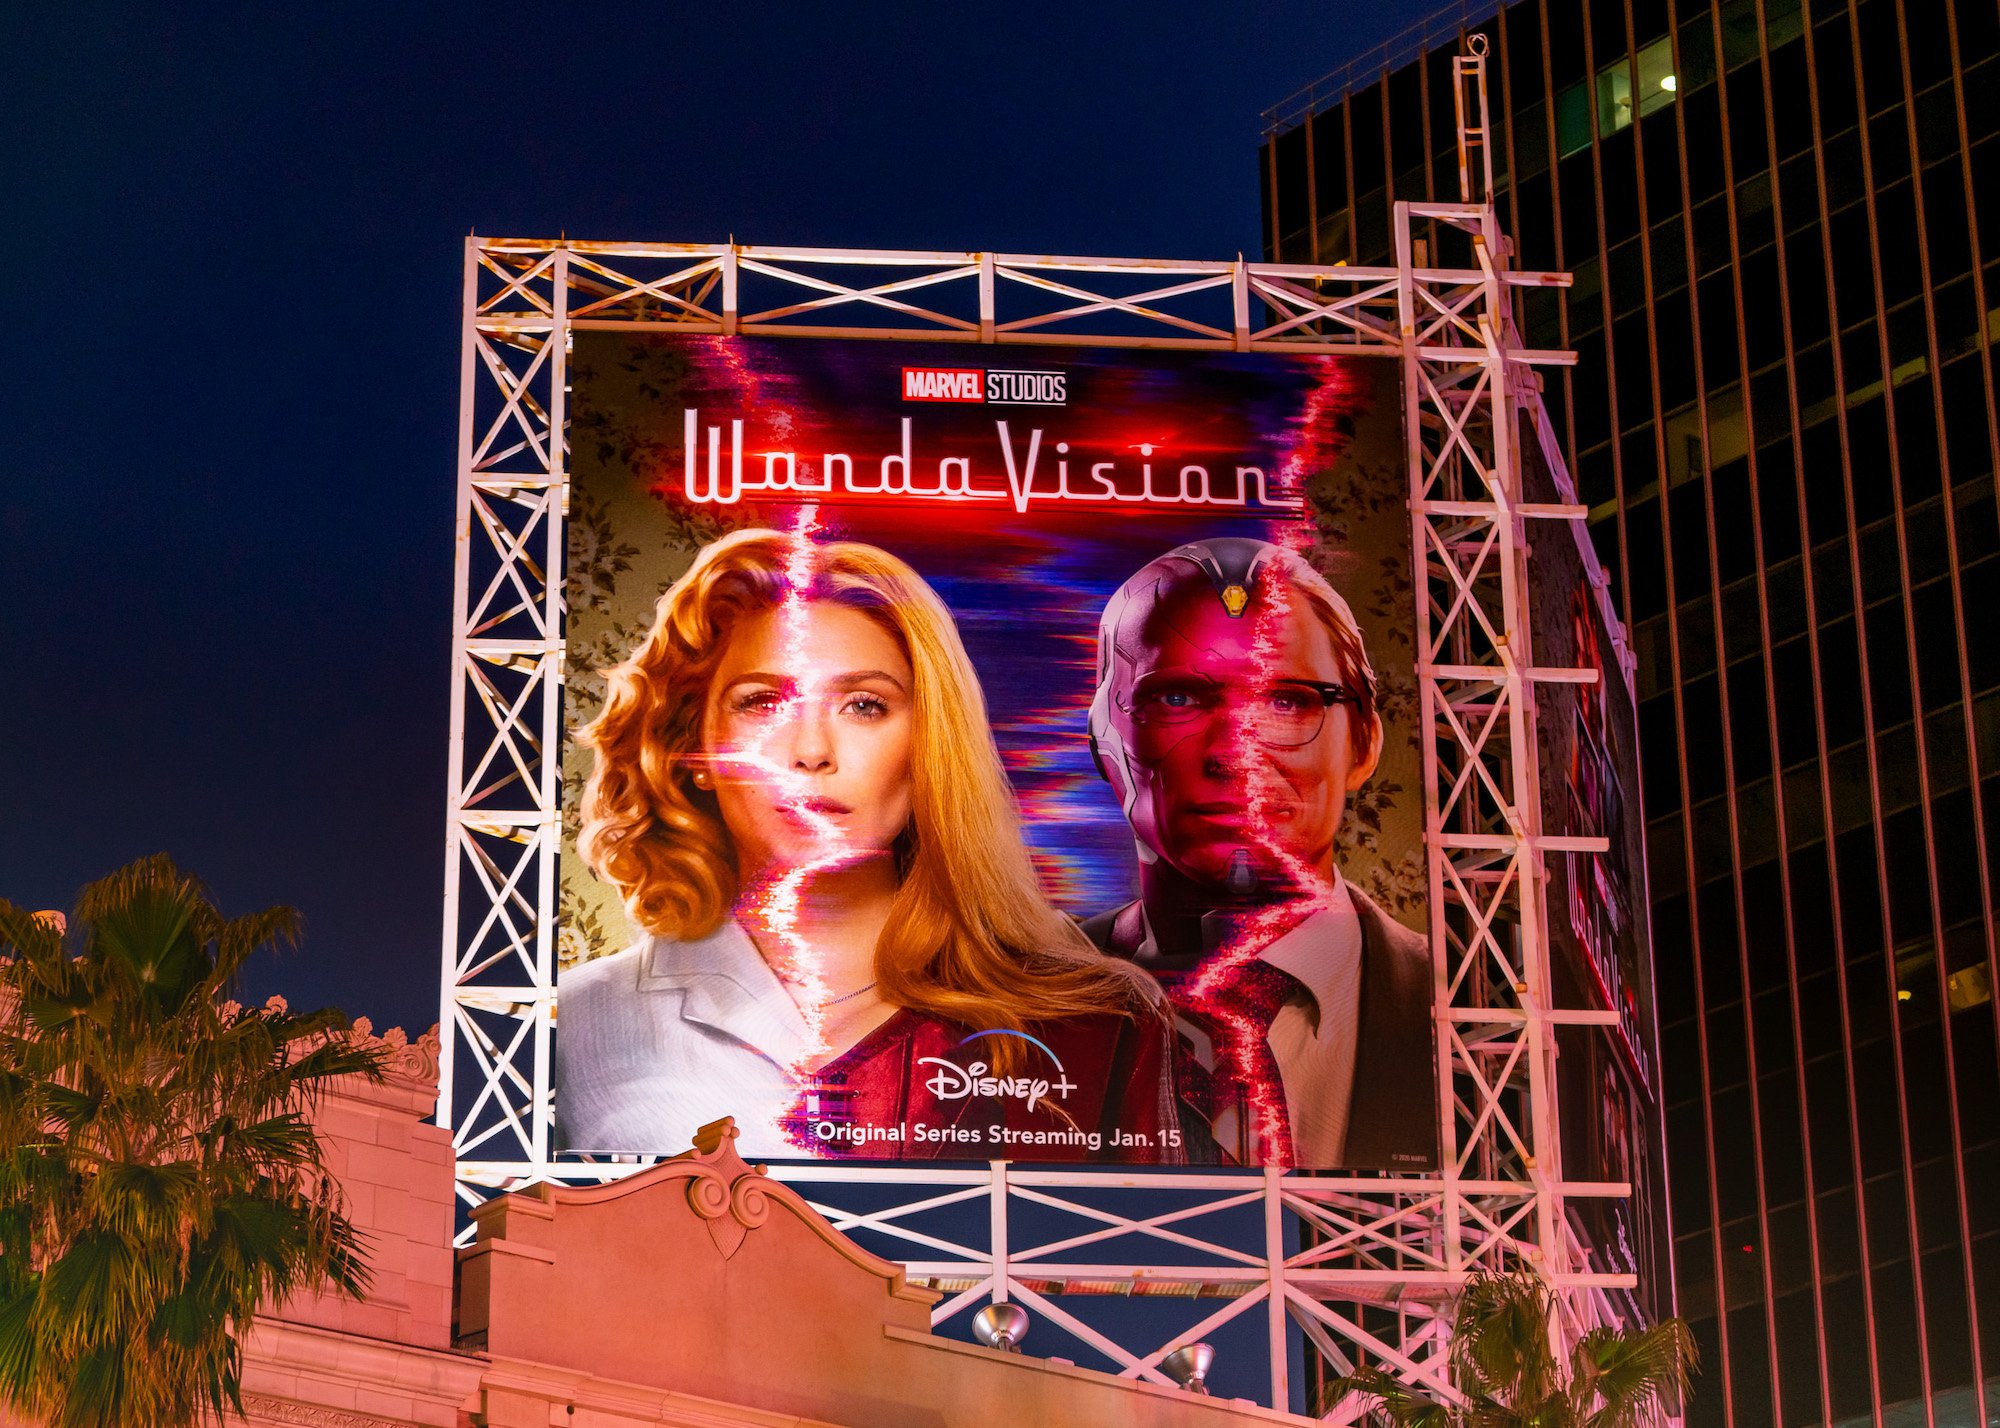 General view of a billboard above the El Capitan Entertainment Centre promoting the upcoming season of the Disney+ Marvel Studios flagship show 'WandaVision'